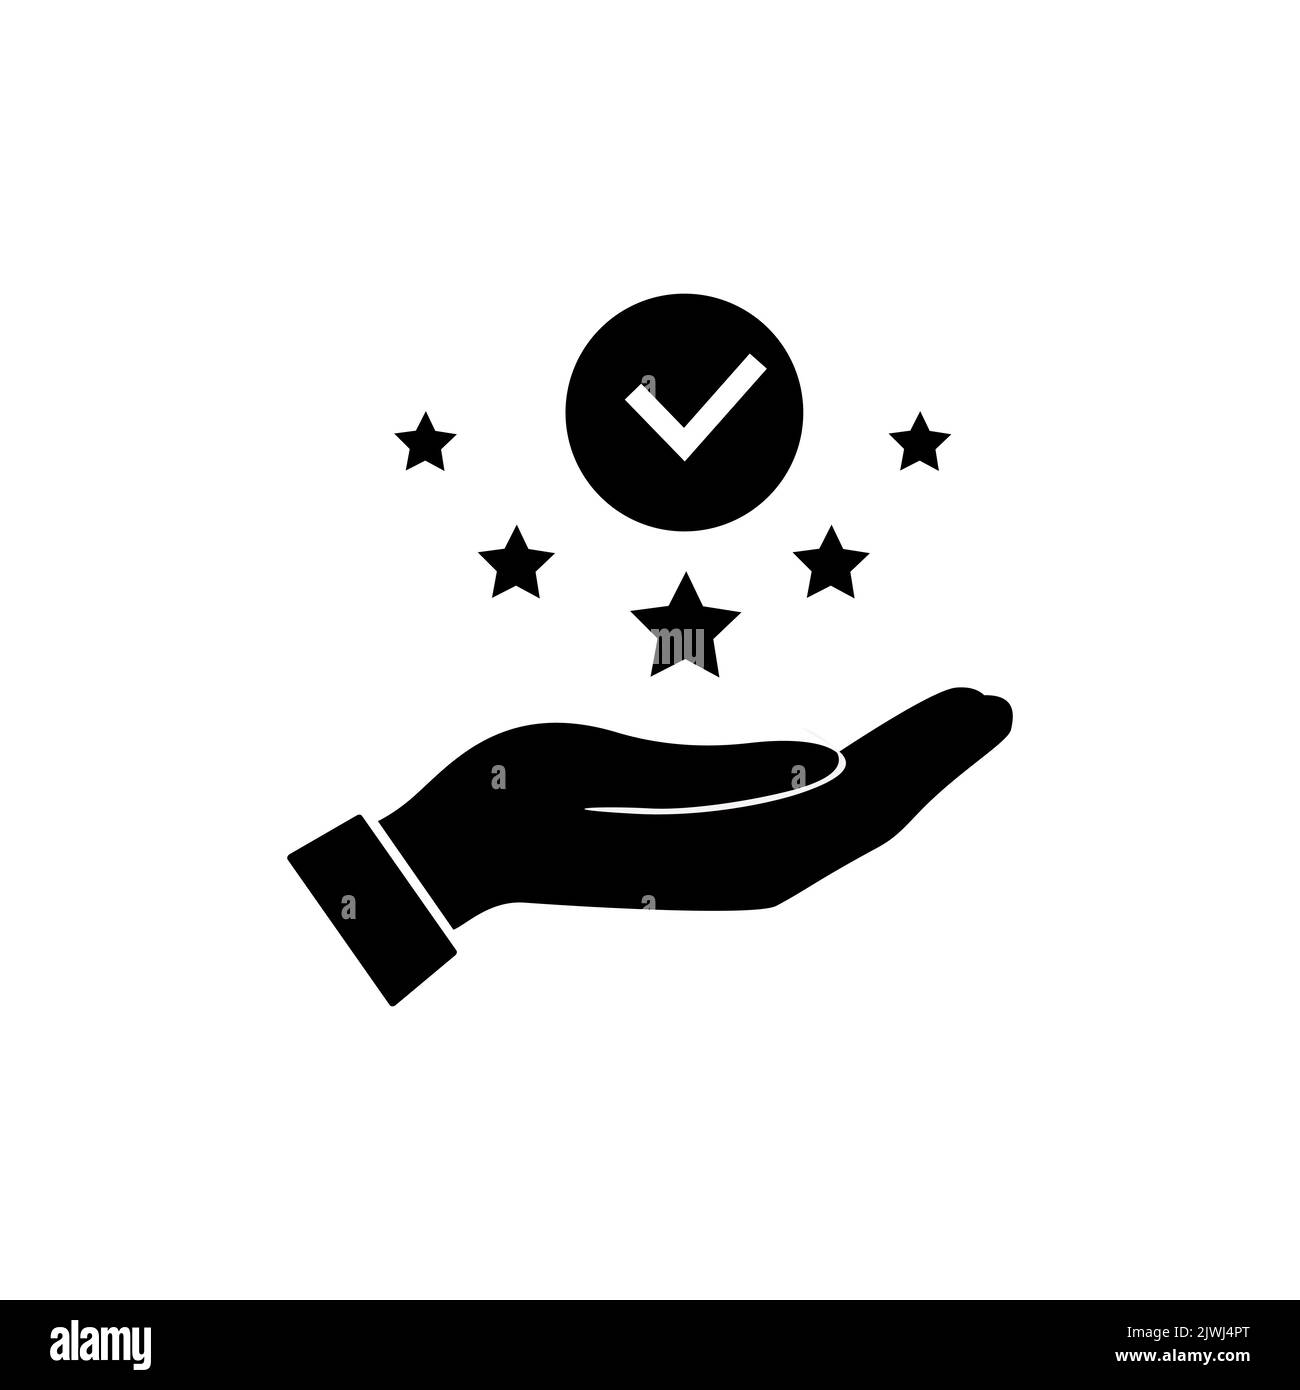 ustomer satisfaction icon. Reputation 5 stars line icon with thumb up. Quality review with feedback template. Customer reputation concept vector illus Stock Vector